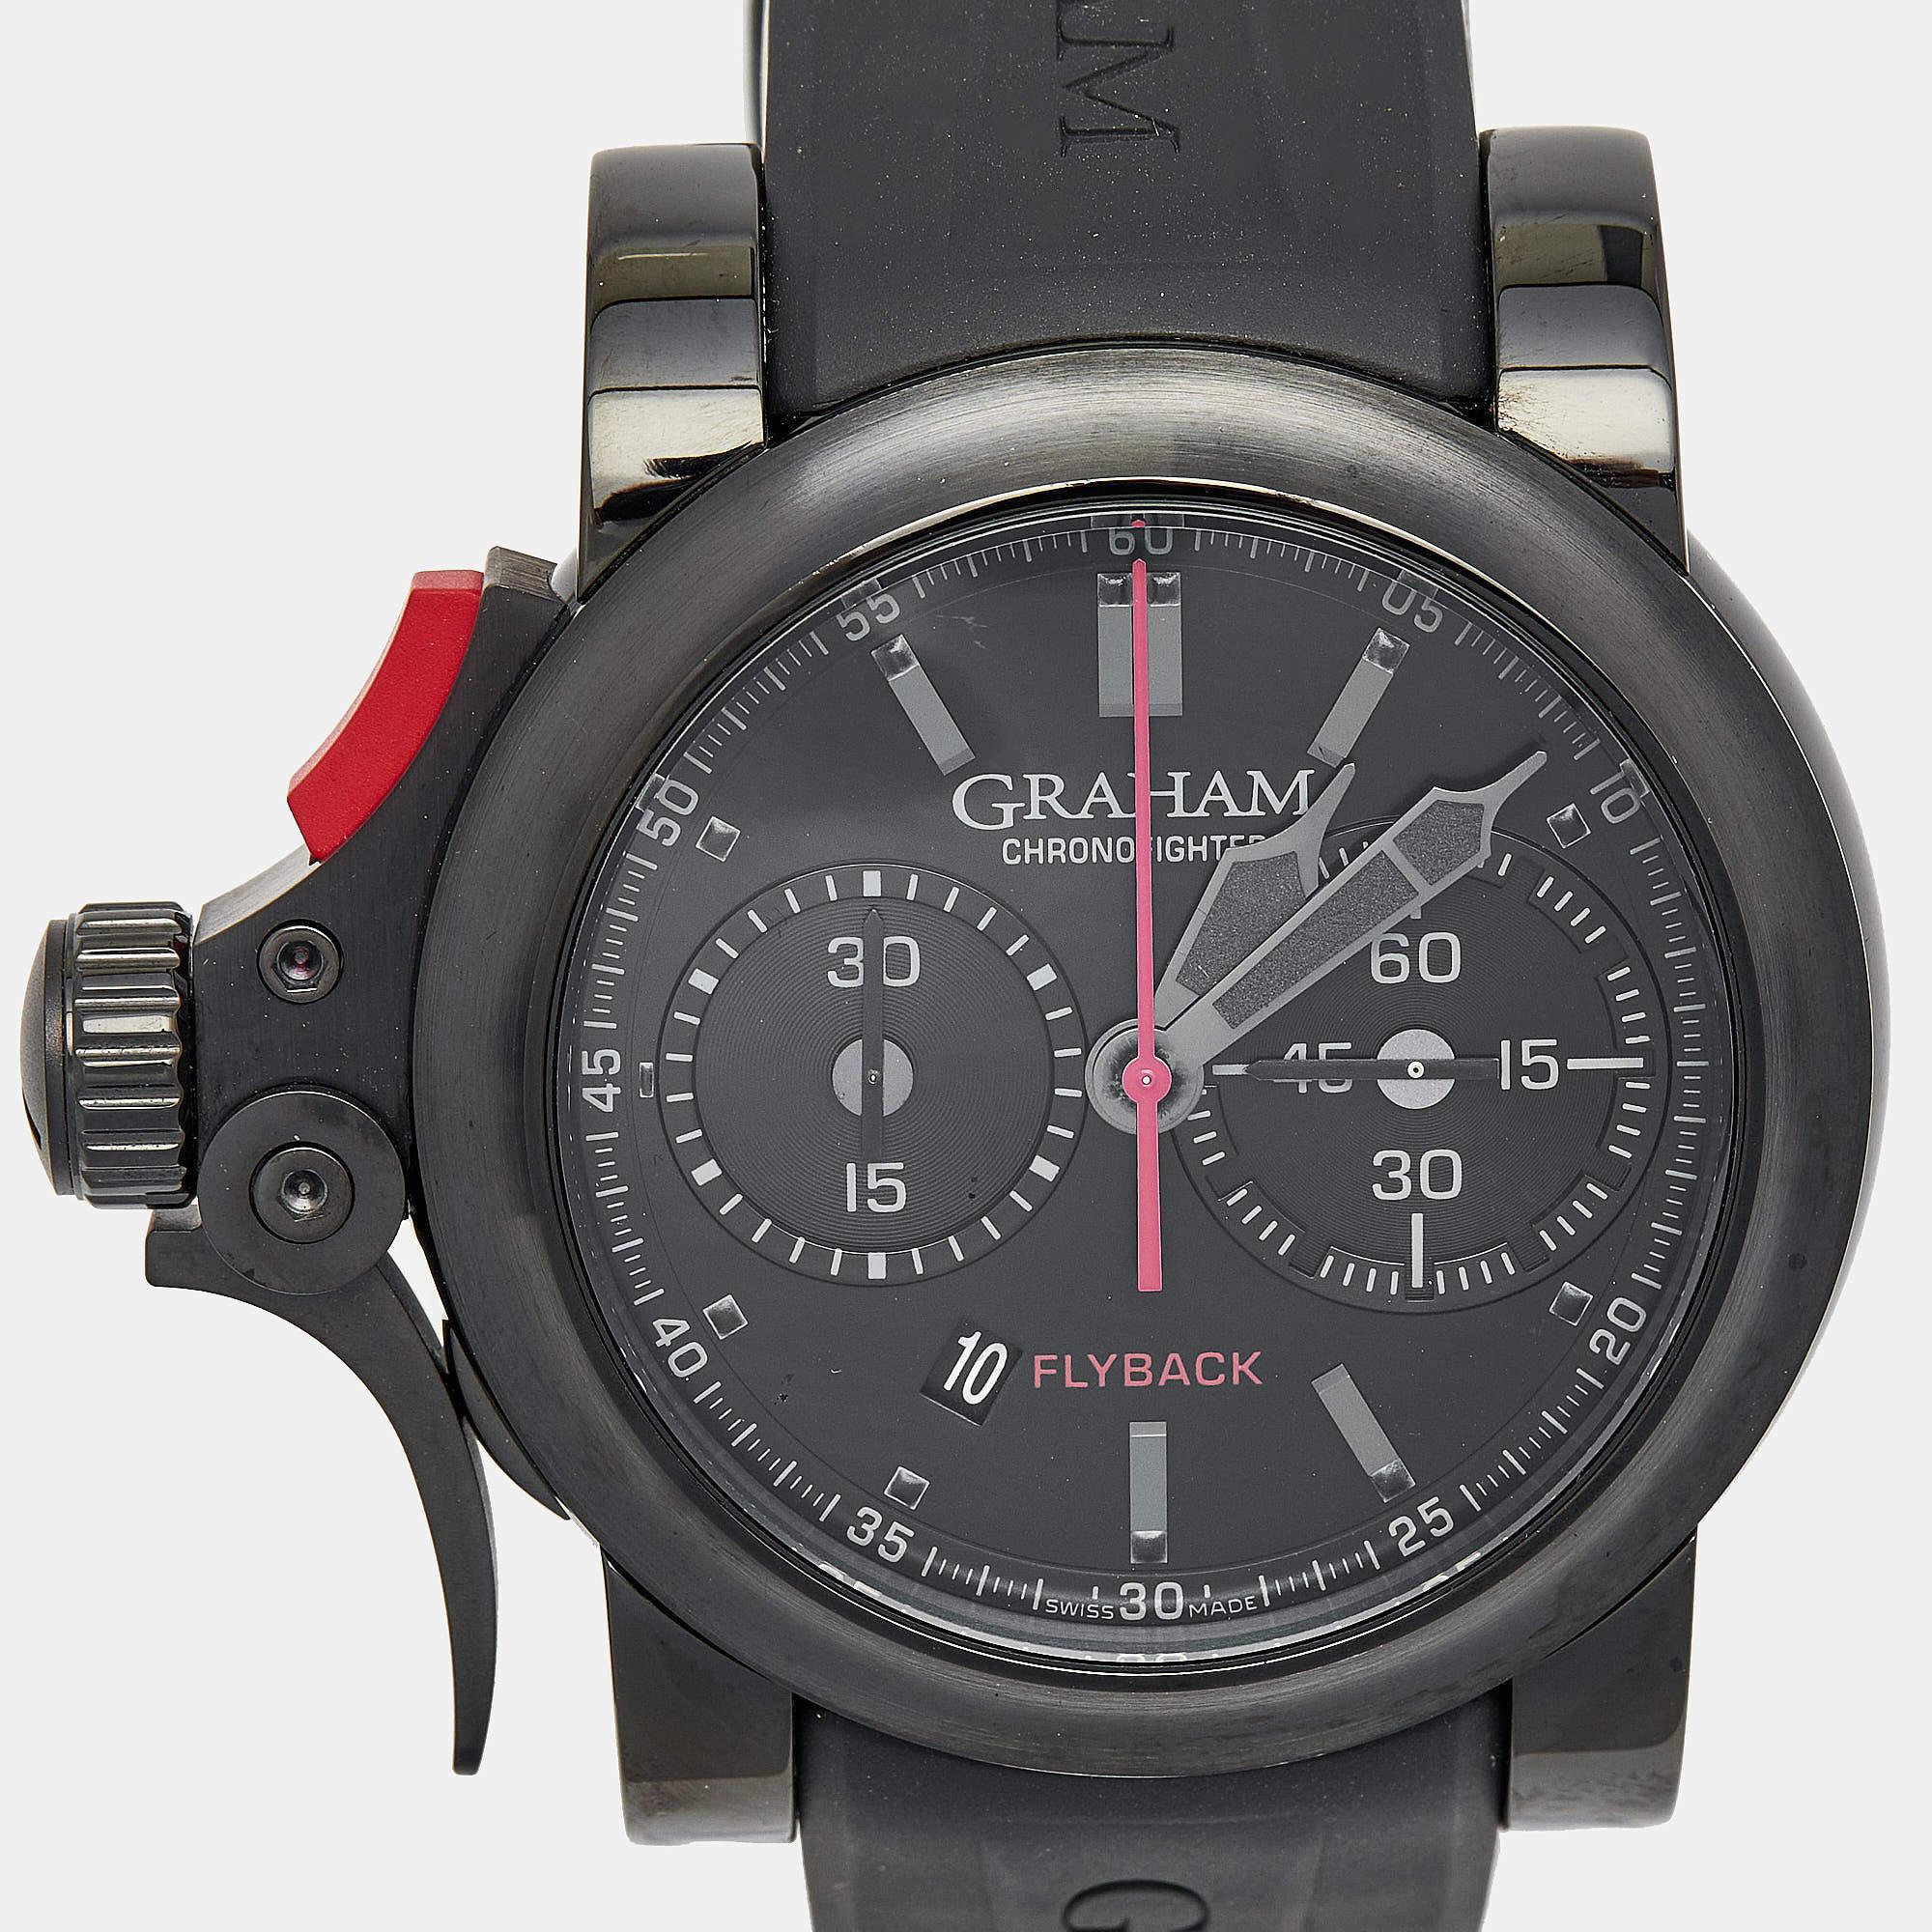 The Chronofighter watch models are perfect examples of Graham's prowess as a master watchmaker; each piece shows us how the brand has aced the way to balance the mechanical dexterity and the visual aspects. The Graham Chronofighter Trigger Flyback